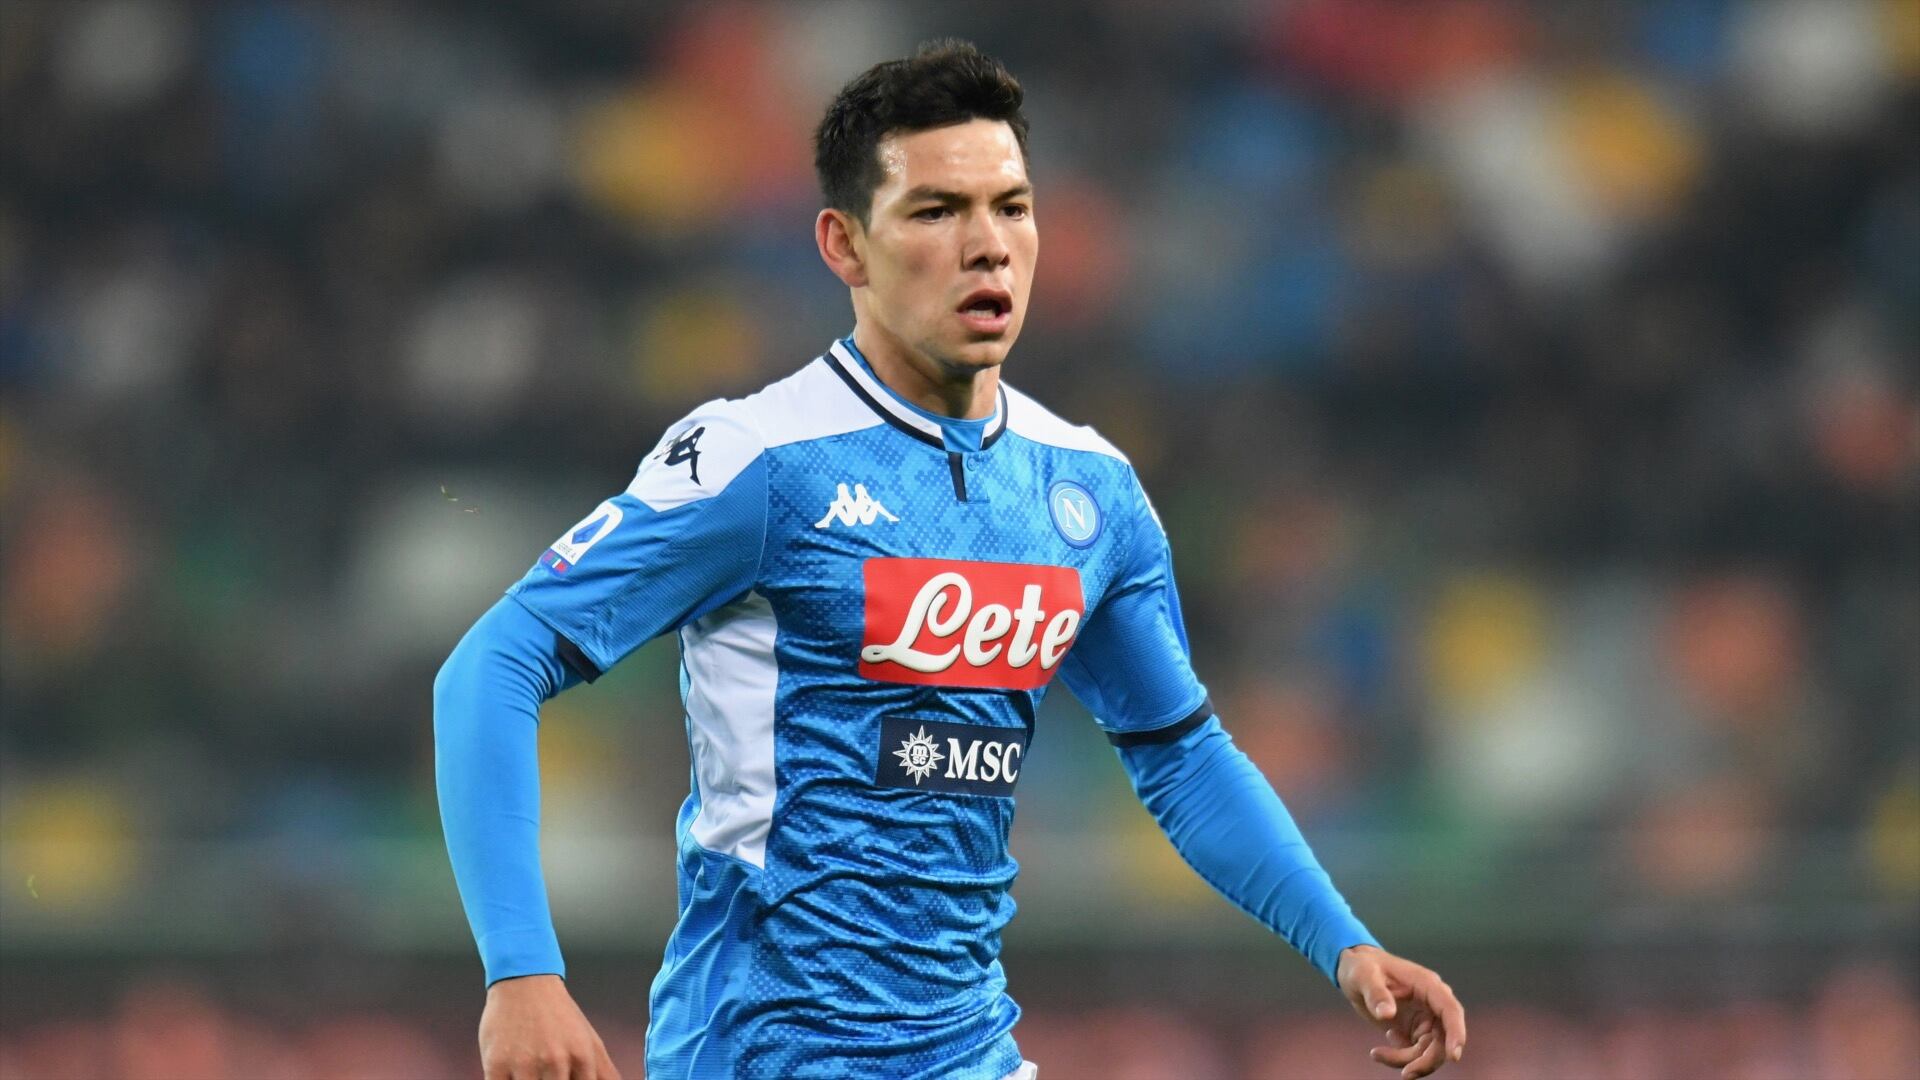 He’s the successor of Hirving “Chucky” Lozano and will play in Premier League next season